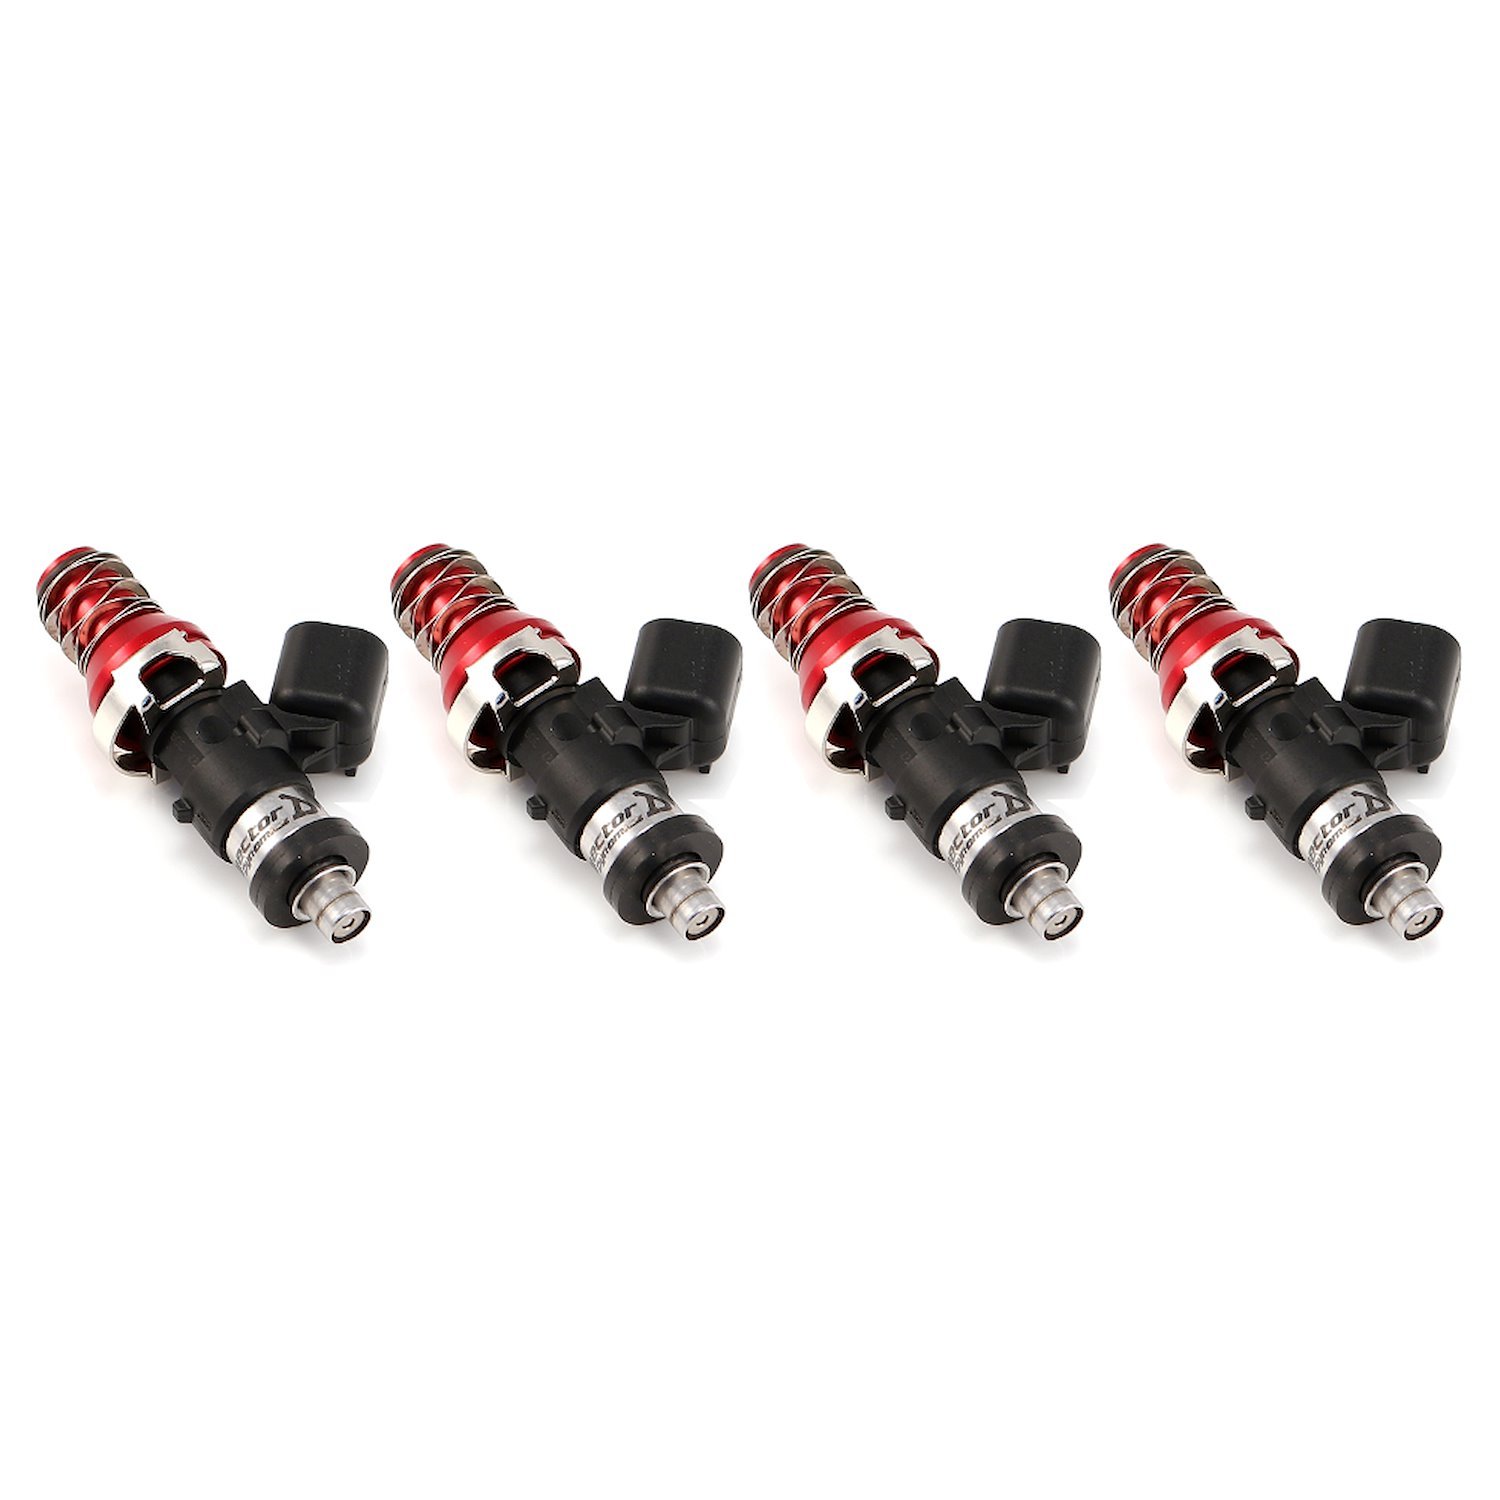 1050.19.01.48.11.4 1050cc Fuel Injector Set, 11 mm Top Adapter (Red), Denso Lower Cushions